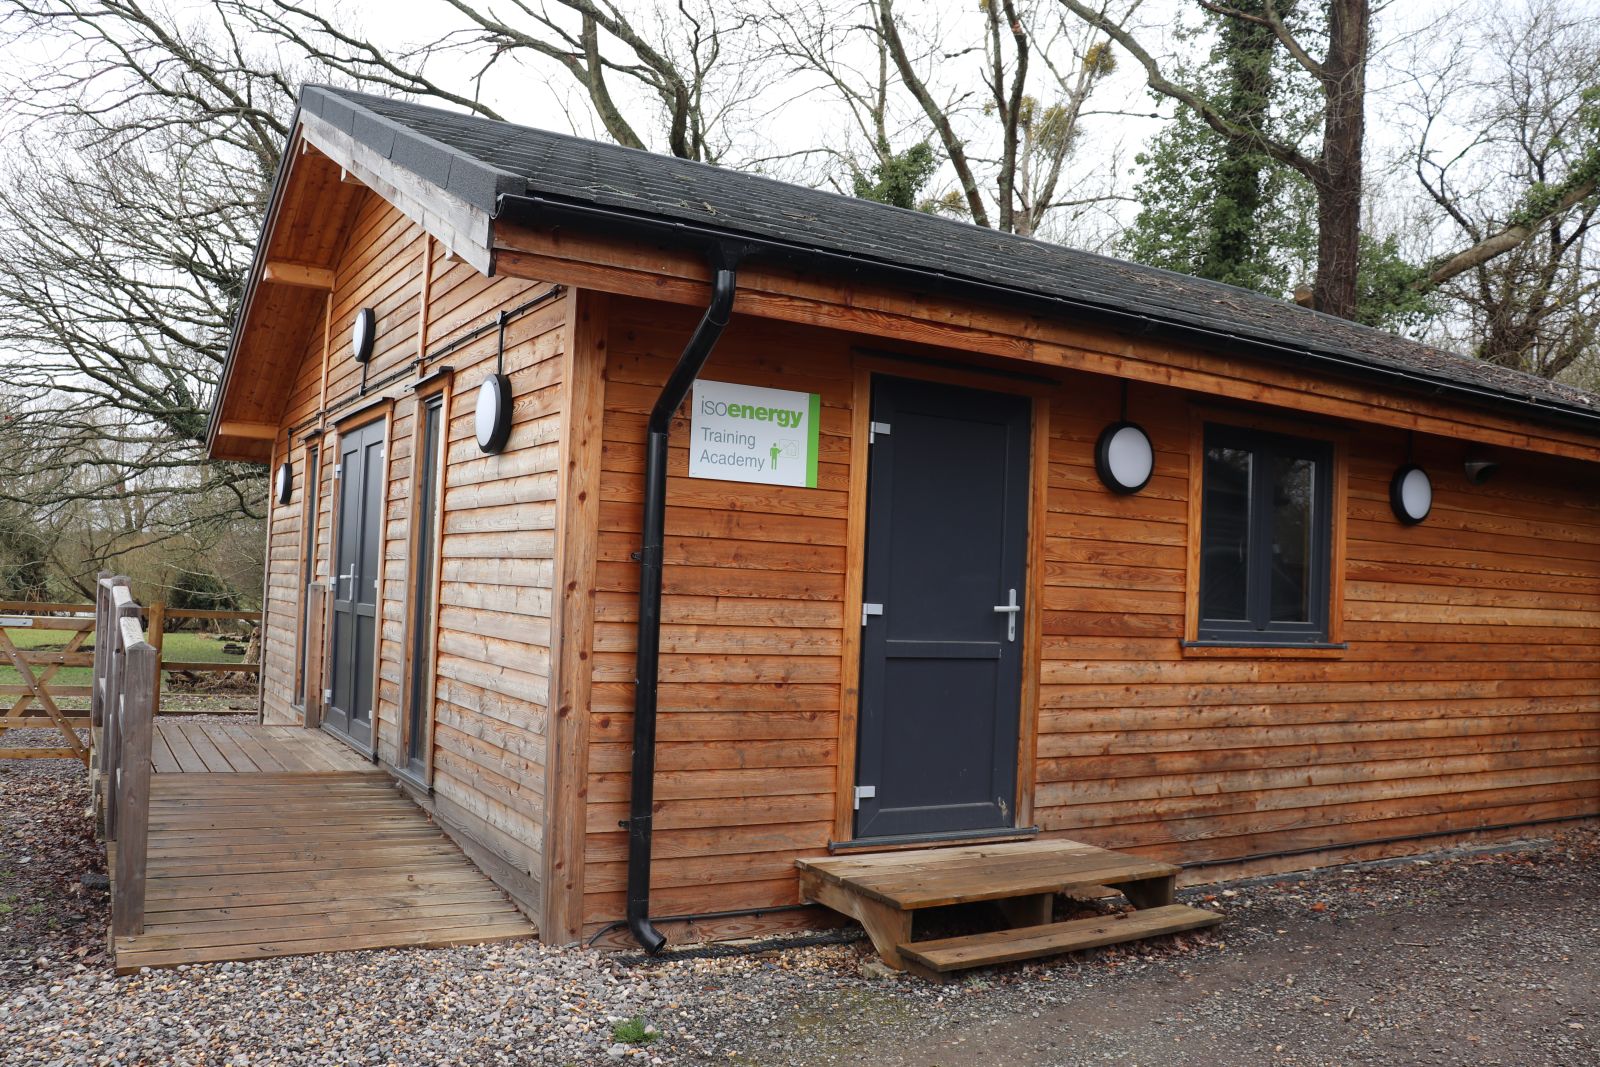 Heat pump training academy - a wooden building with slate roof  